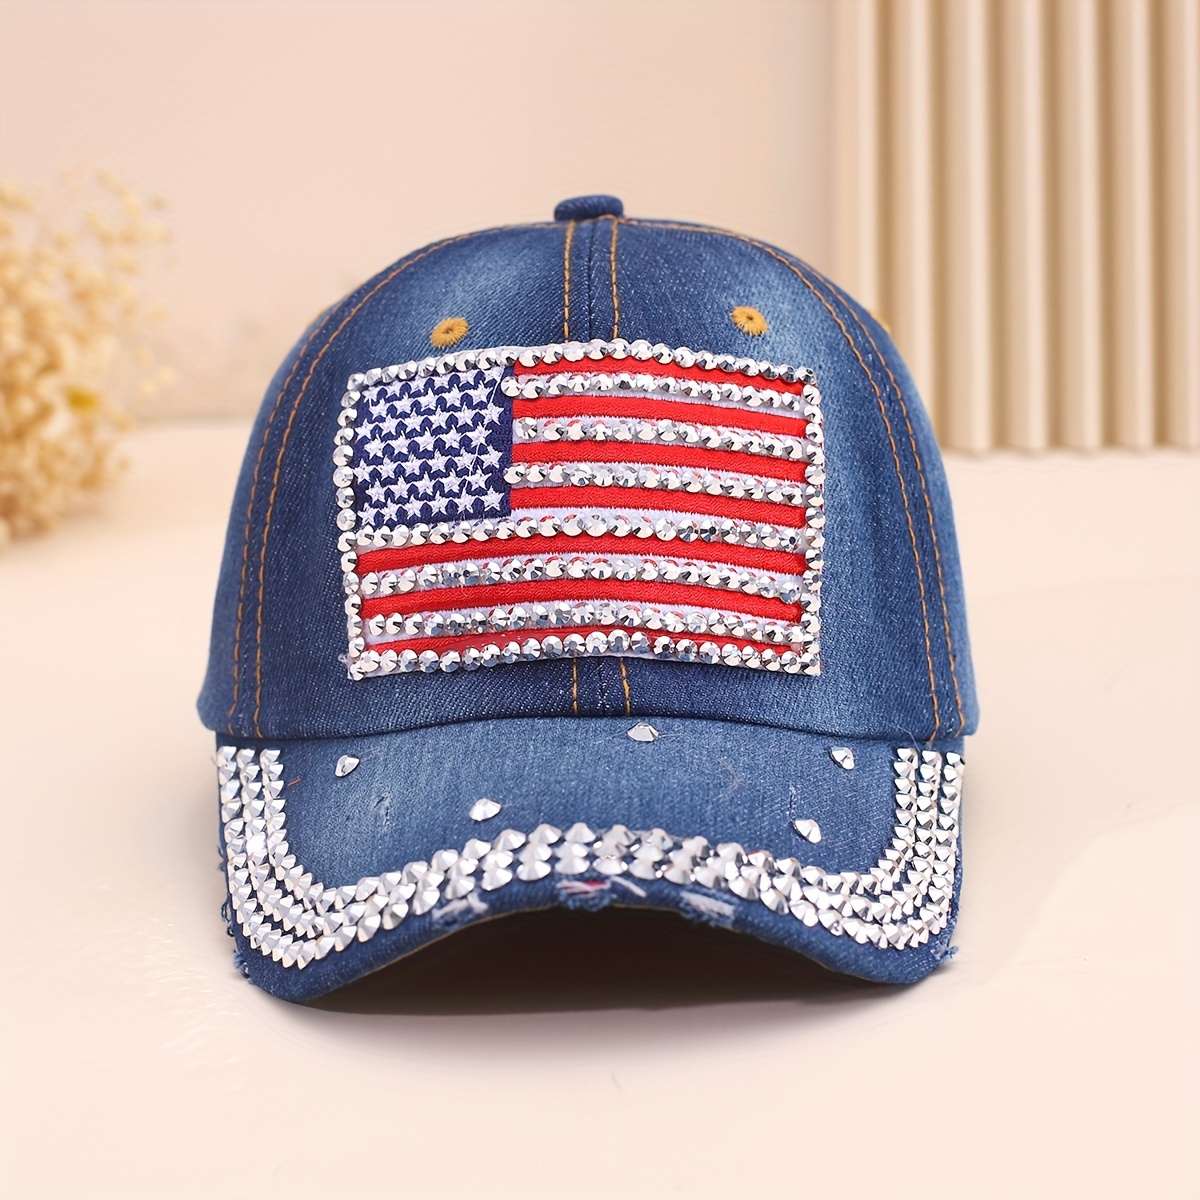 

Denim Rhinestone American Flag Baseball Cap For Women, Sun-protective Duckbill Hat, Casual Sport Cap With Bling Accents